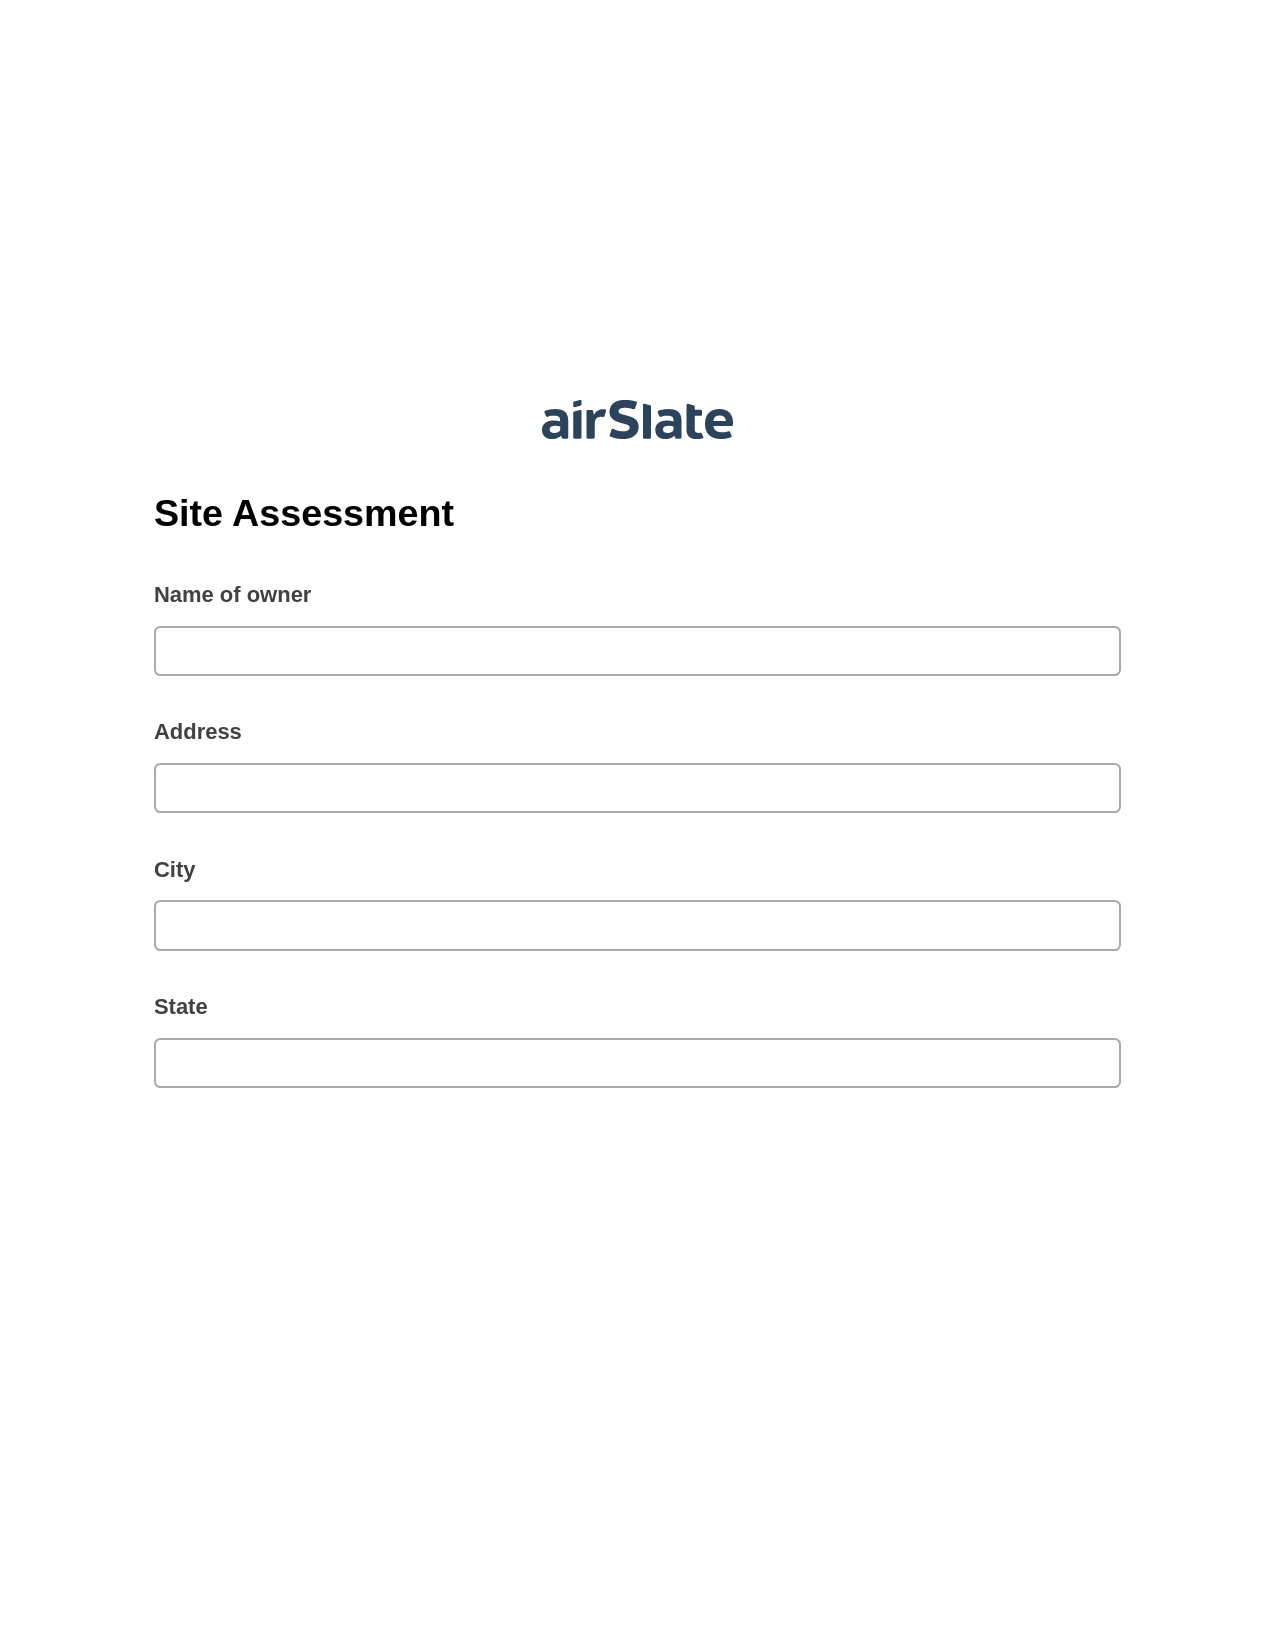 Site Assessment Pre-fill Document Bot, Assign Slate Name Bot, Export to Excel 365 Bot